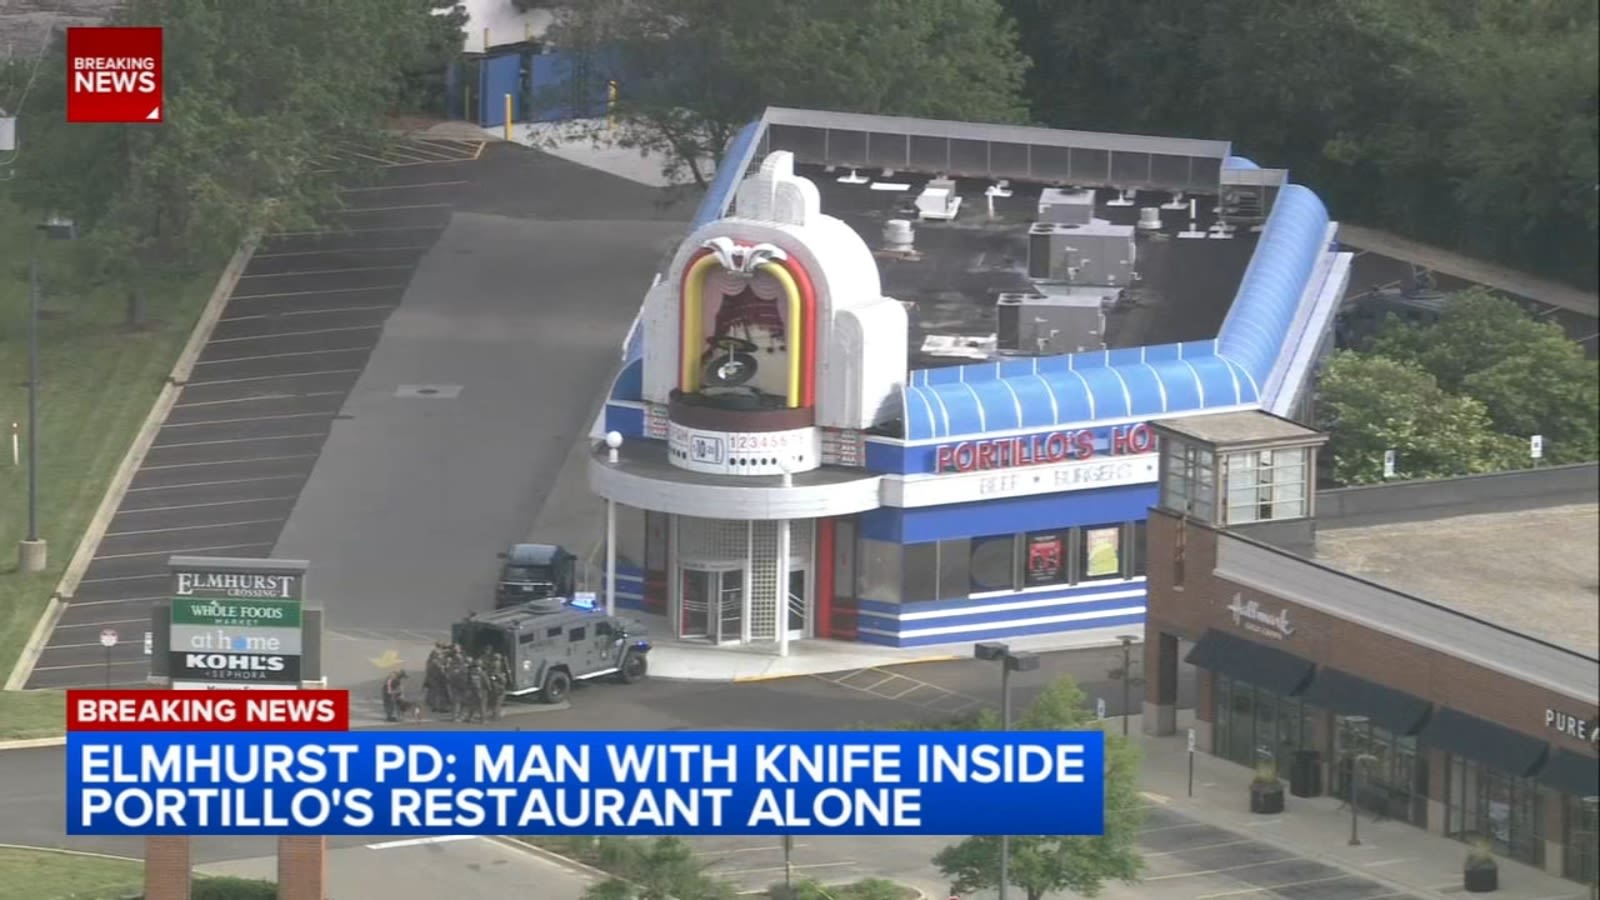 Man reportedly with knife barricaded inside suburb Portillo's, Elmhurst police say